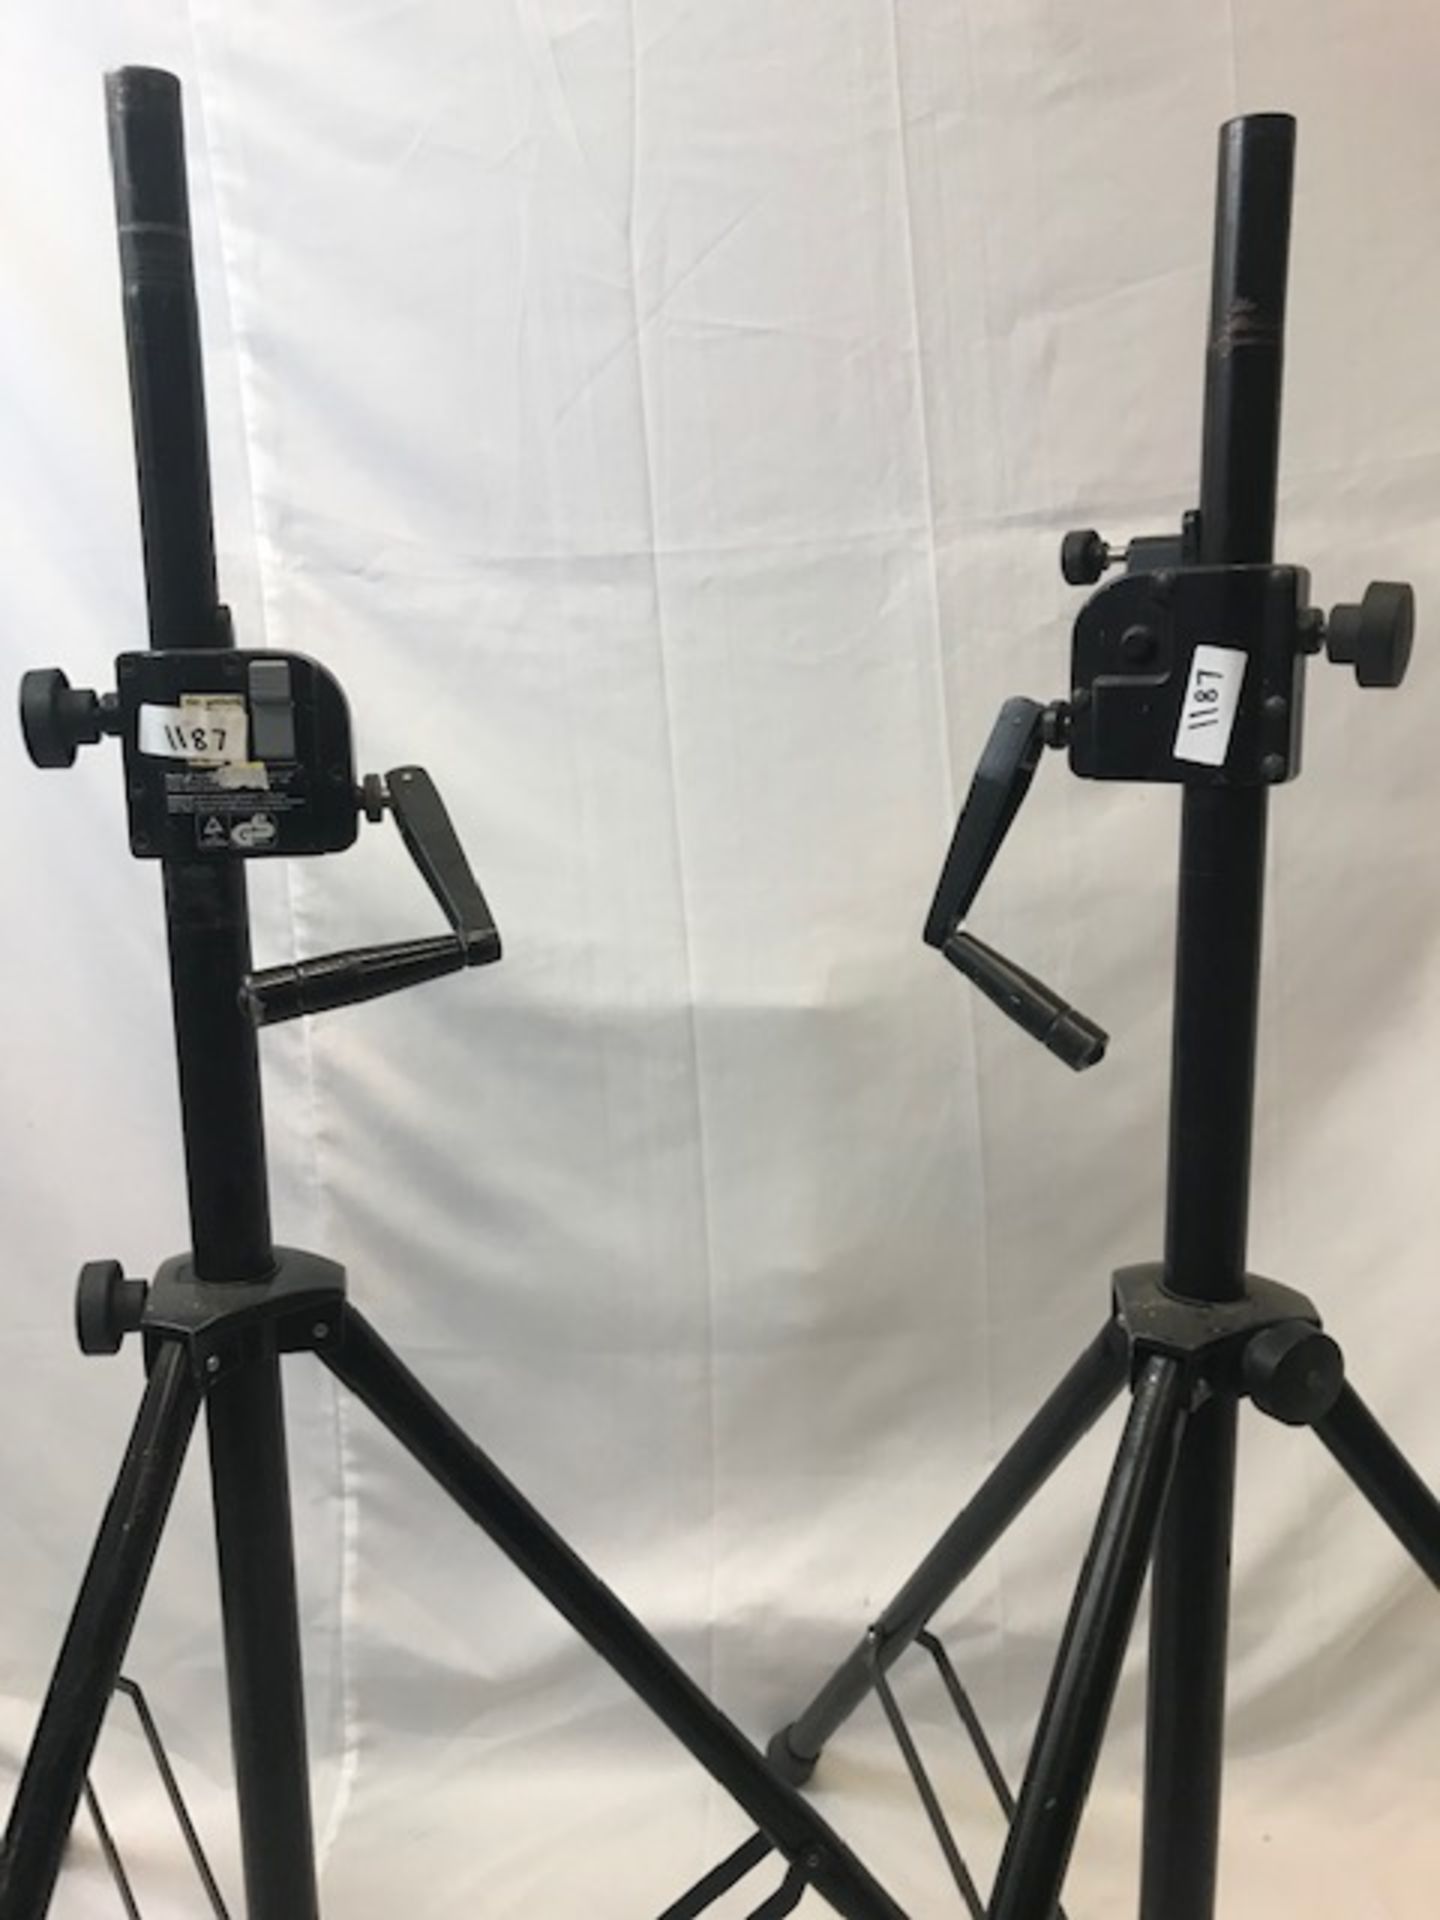 1 x Pair of wind up speaker stands - Ref: 1187 - CL581 - Location: Altrincham WA14 - Image 2 of 2